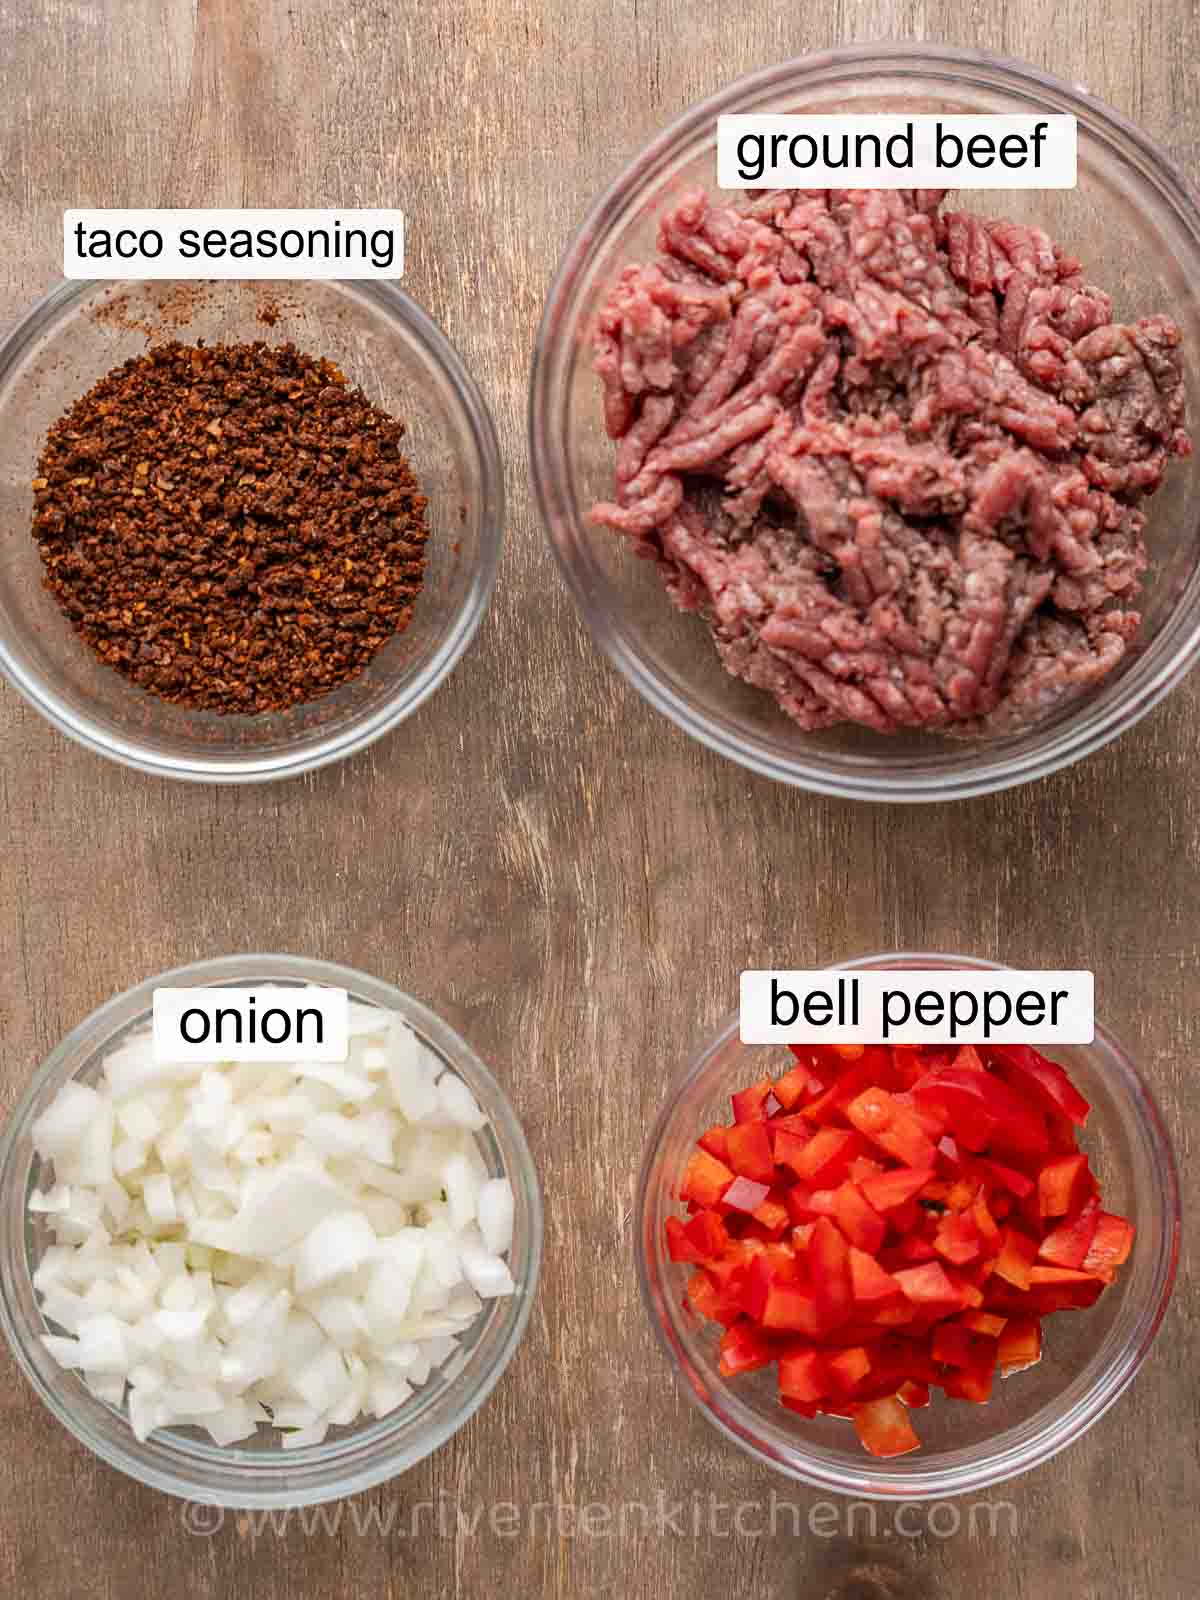 ground beef, onion, red bell pepper and taco seasoning.